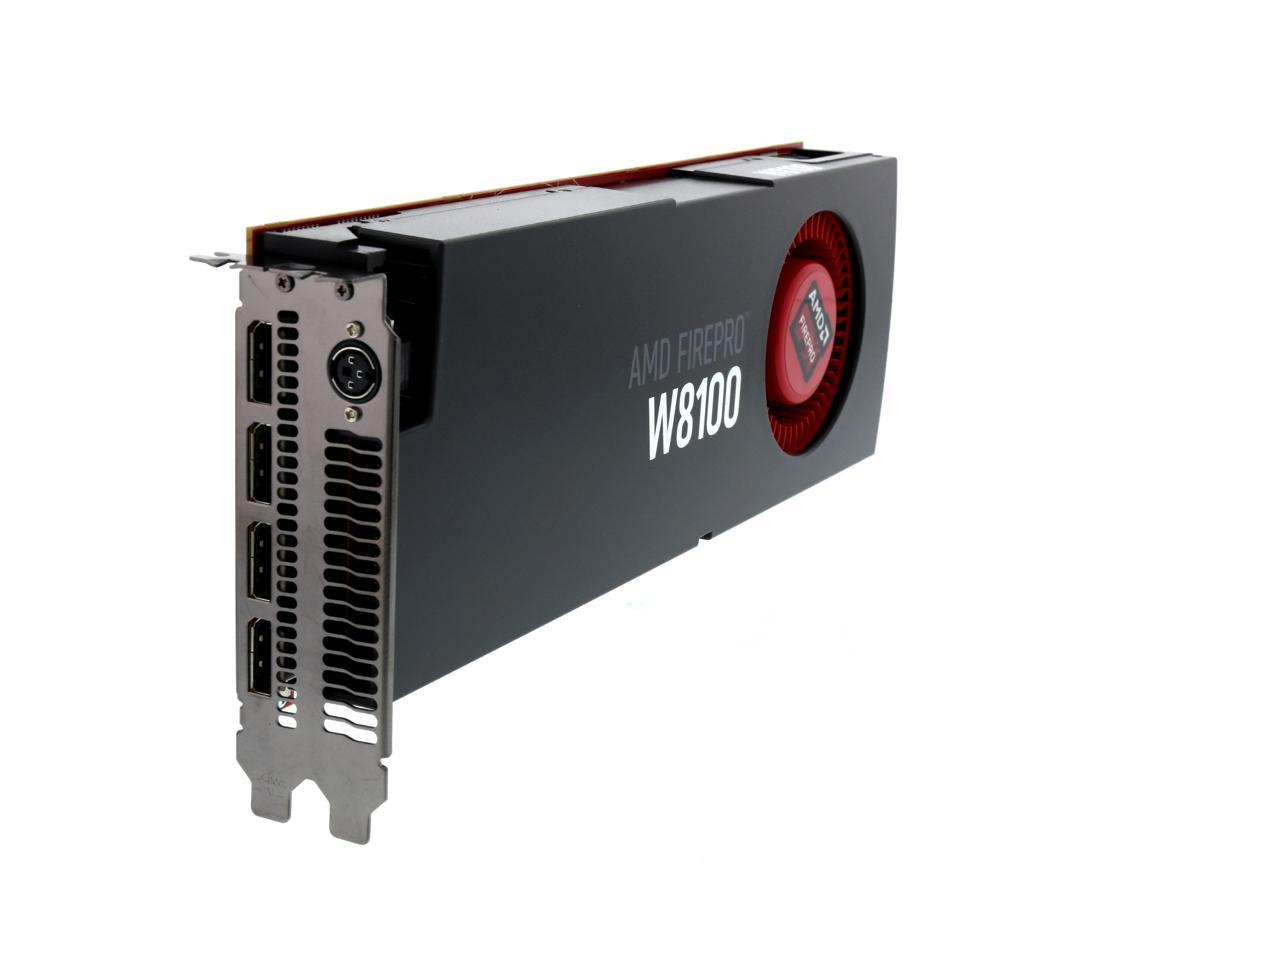 AMD FirePro W8100 100-505976 8GB 512-bit GDDR5 PCI Express 3.0 x16  CrossFire Supported Workstation Video Card